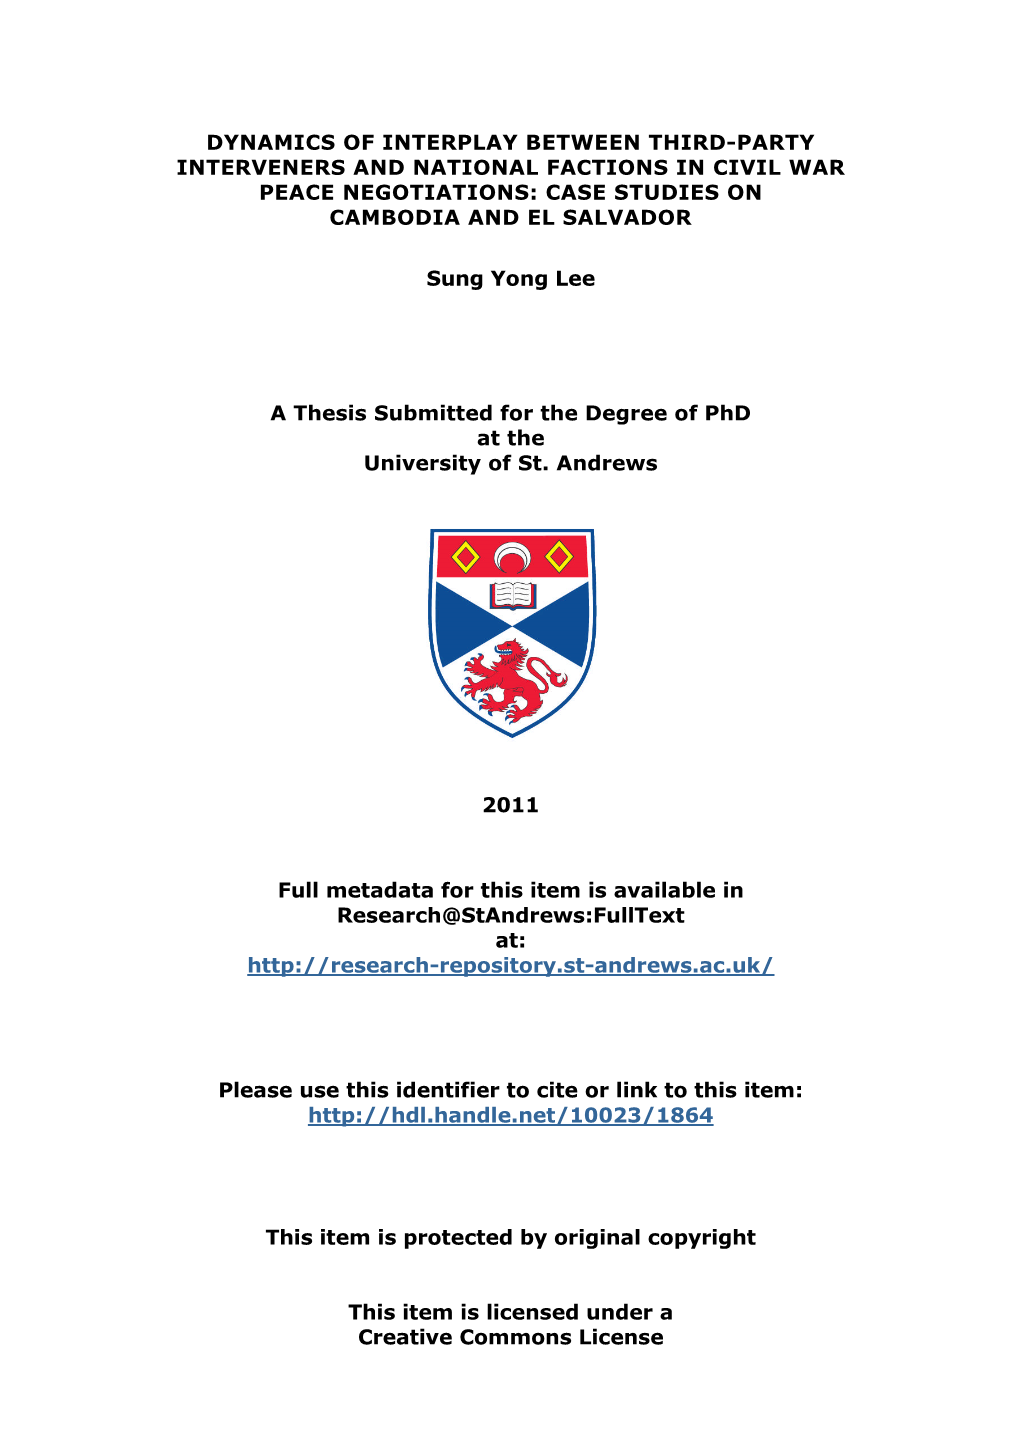 Sung Yong Lee Phd Thesis